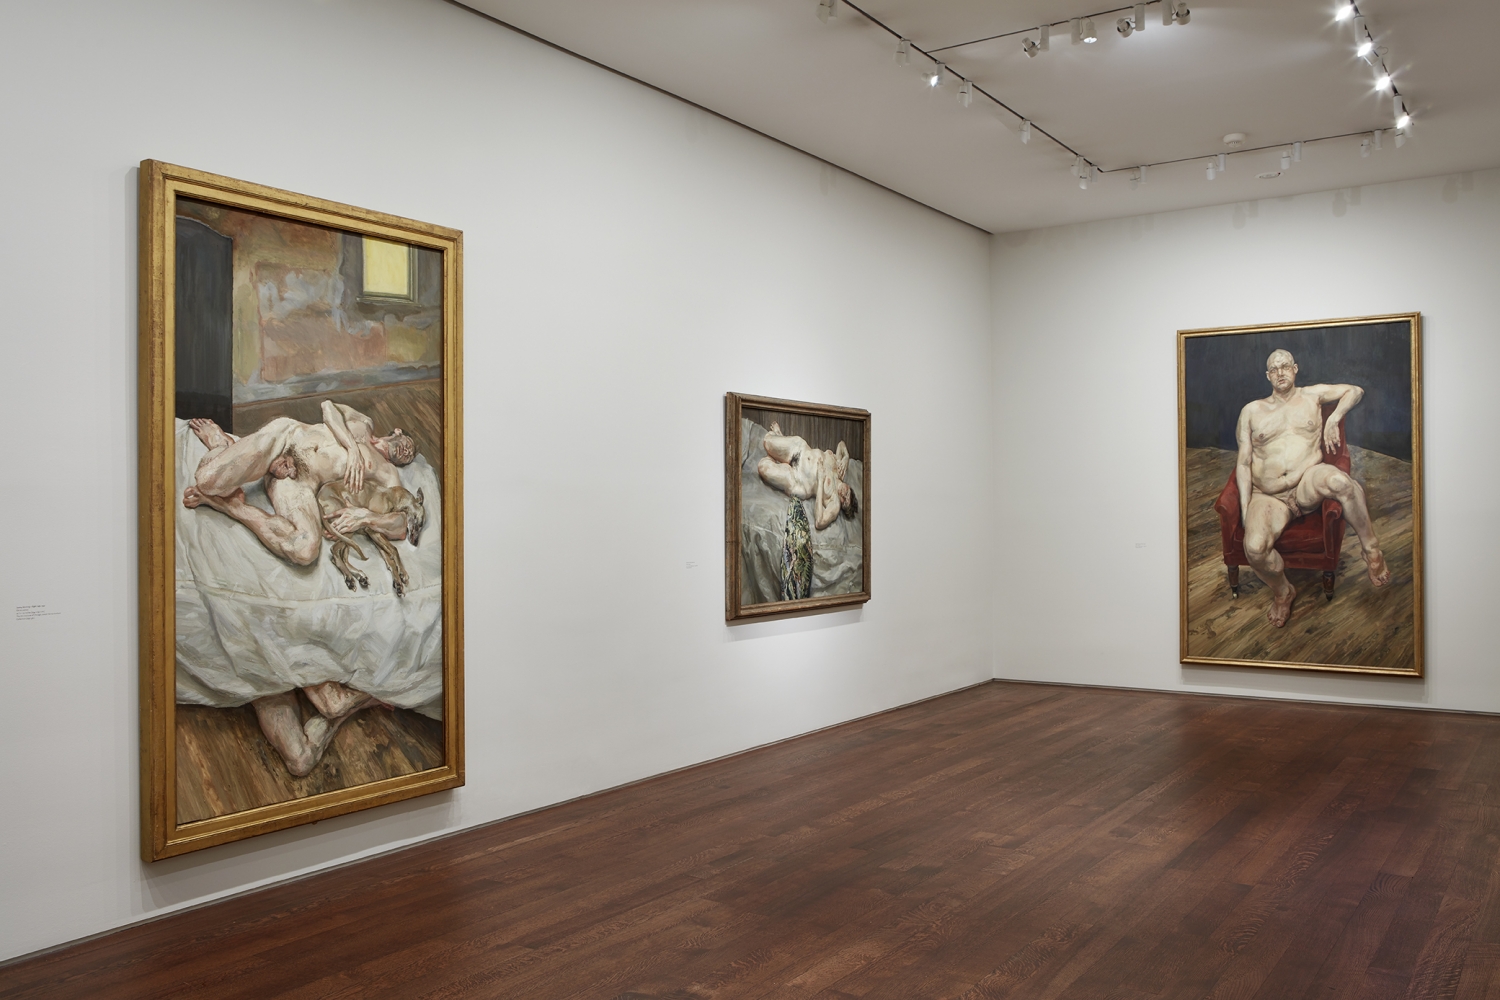 Installation view of&nbsp;Lucian Freud: Monumental&nbsp;at Acquavella Galleries from April 5&ndash;May 24, 2019. Left to right:&nbsp;Sunny Morning&mdash;Eight Legs,&nbsp;1997, Lent by&nbsp;The Art Institute of Chicago; Joseph Winterbotham Collection (1997.561);&nbsp;Portrait on Gray Cover, 1996, Lent by&nbsp;Private Collection;&nbsp;Leigh Bowery (Seated),&nbsp;1990, Lent by&nbsp;Private Collection.&nbsp;Photo by Kent Pell. Art&nbsp;&copy; The Lucian Freud Archive / Bridgeman Images.